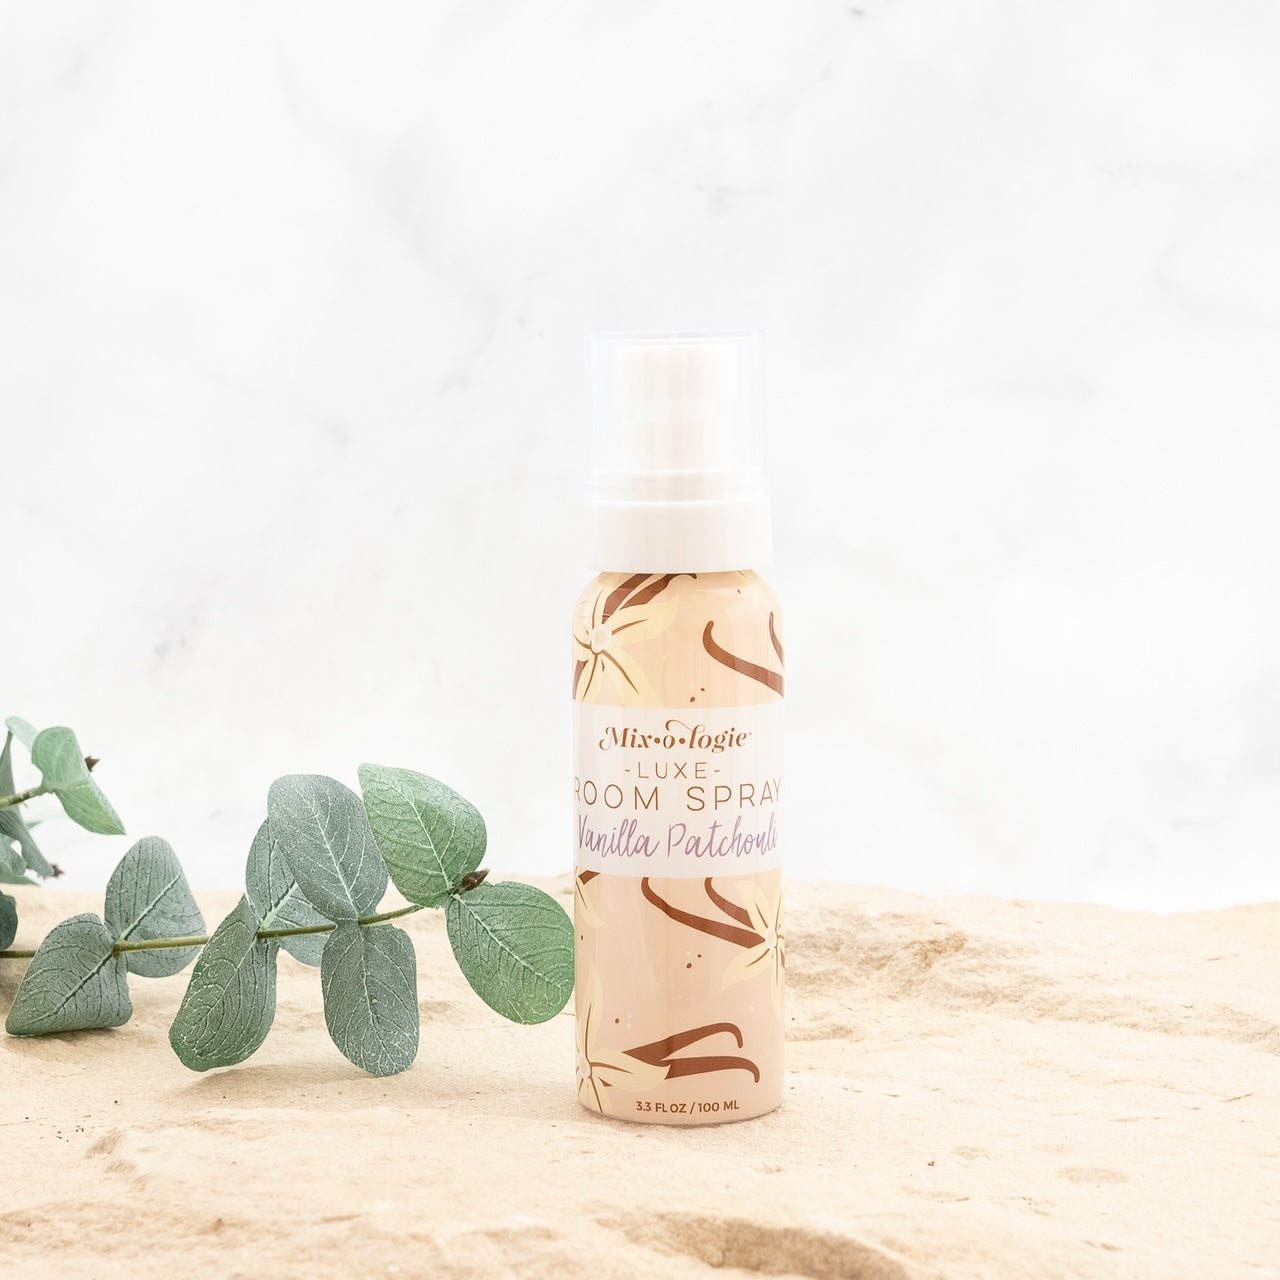 Preorder: Vanilla Patchouli by Mixologie (Ships in 1-2 Weeks)